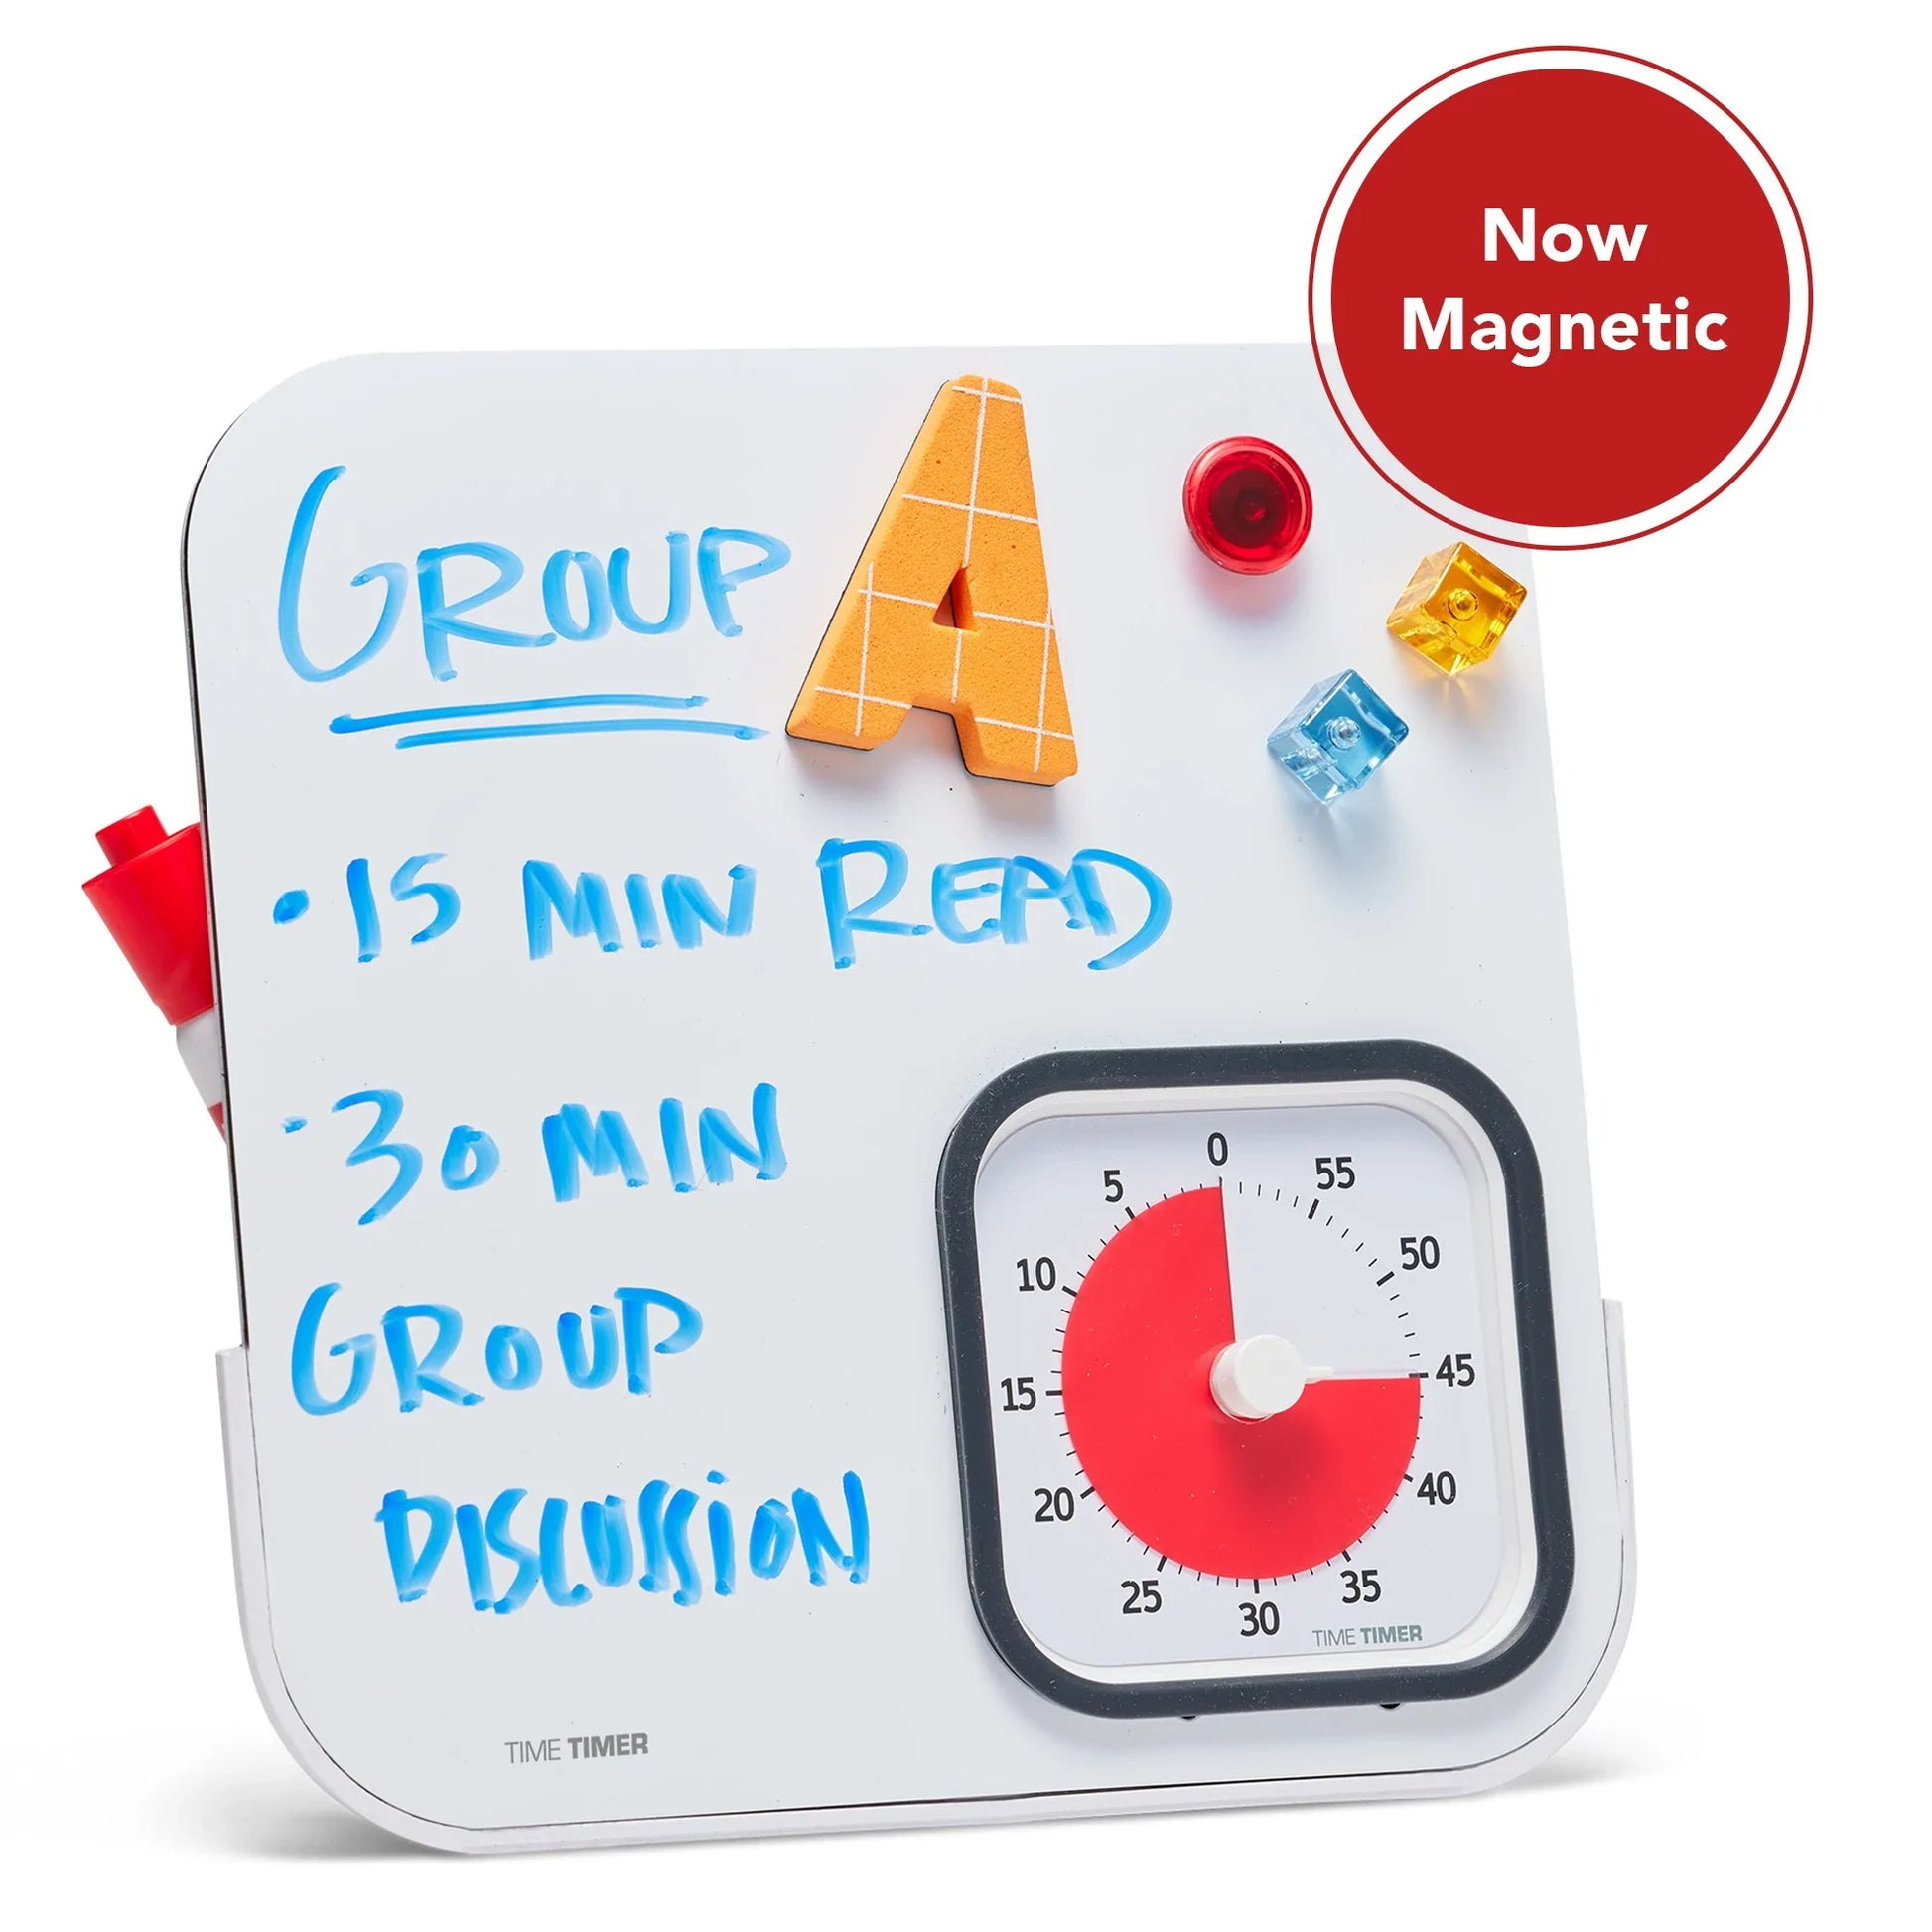 Time_Timer_Visual_Dry_erase_board_Timer_set_to_45_mins_On_Board_written_GROUP_A_15_minutes_to_read_30_minute_group_discussion